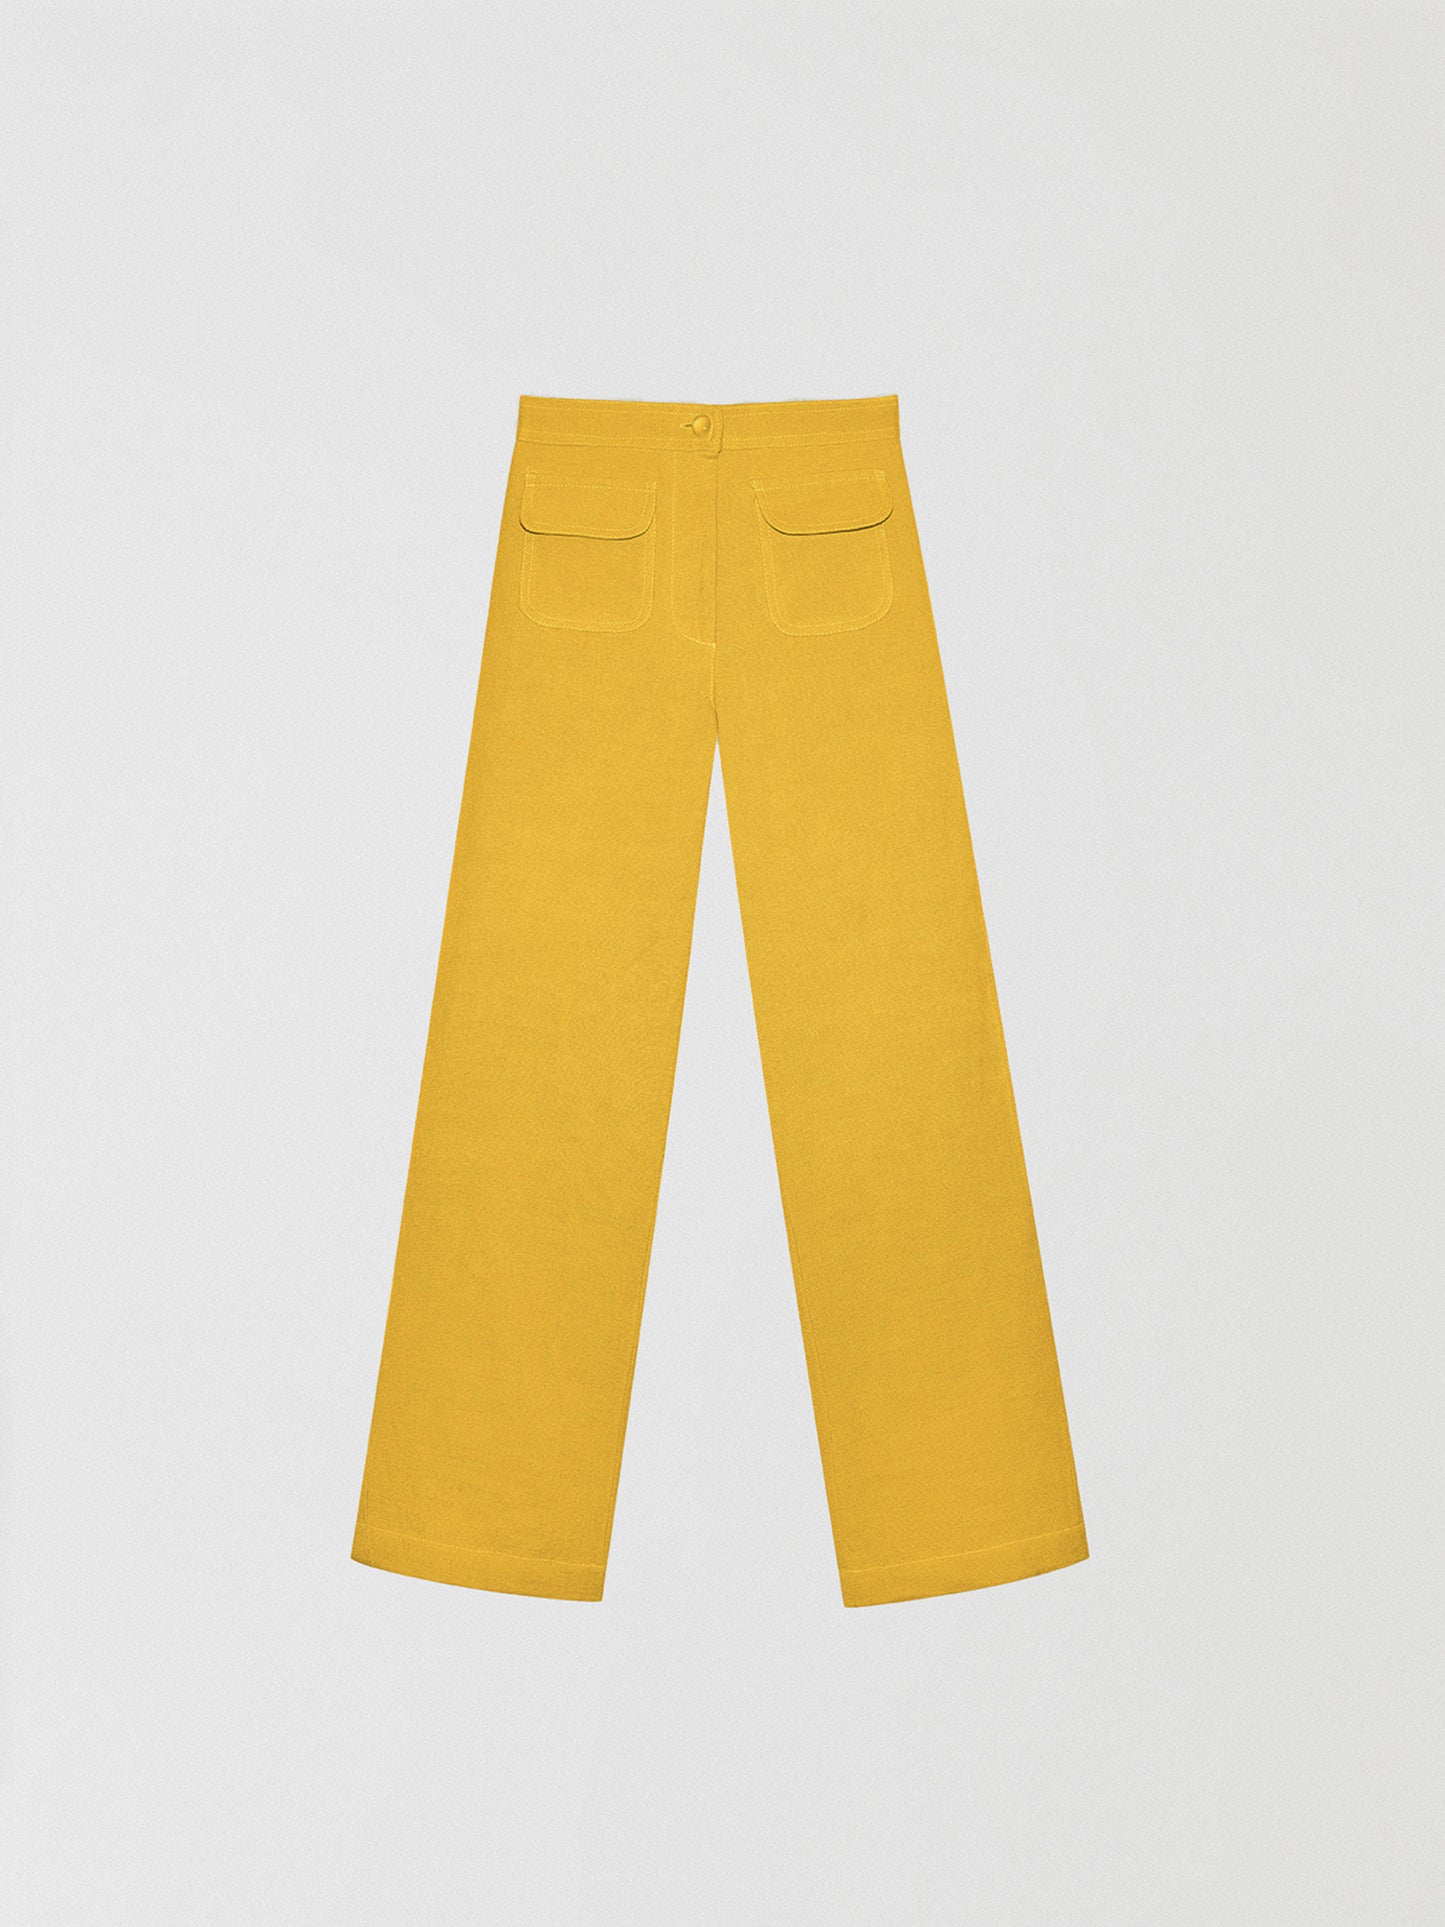 Yellow high-waisted linen trousers with pockets